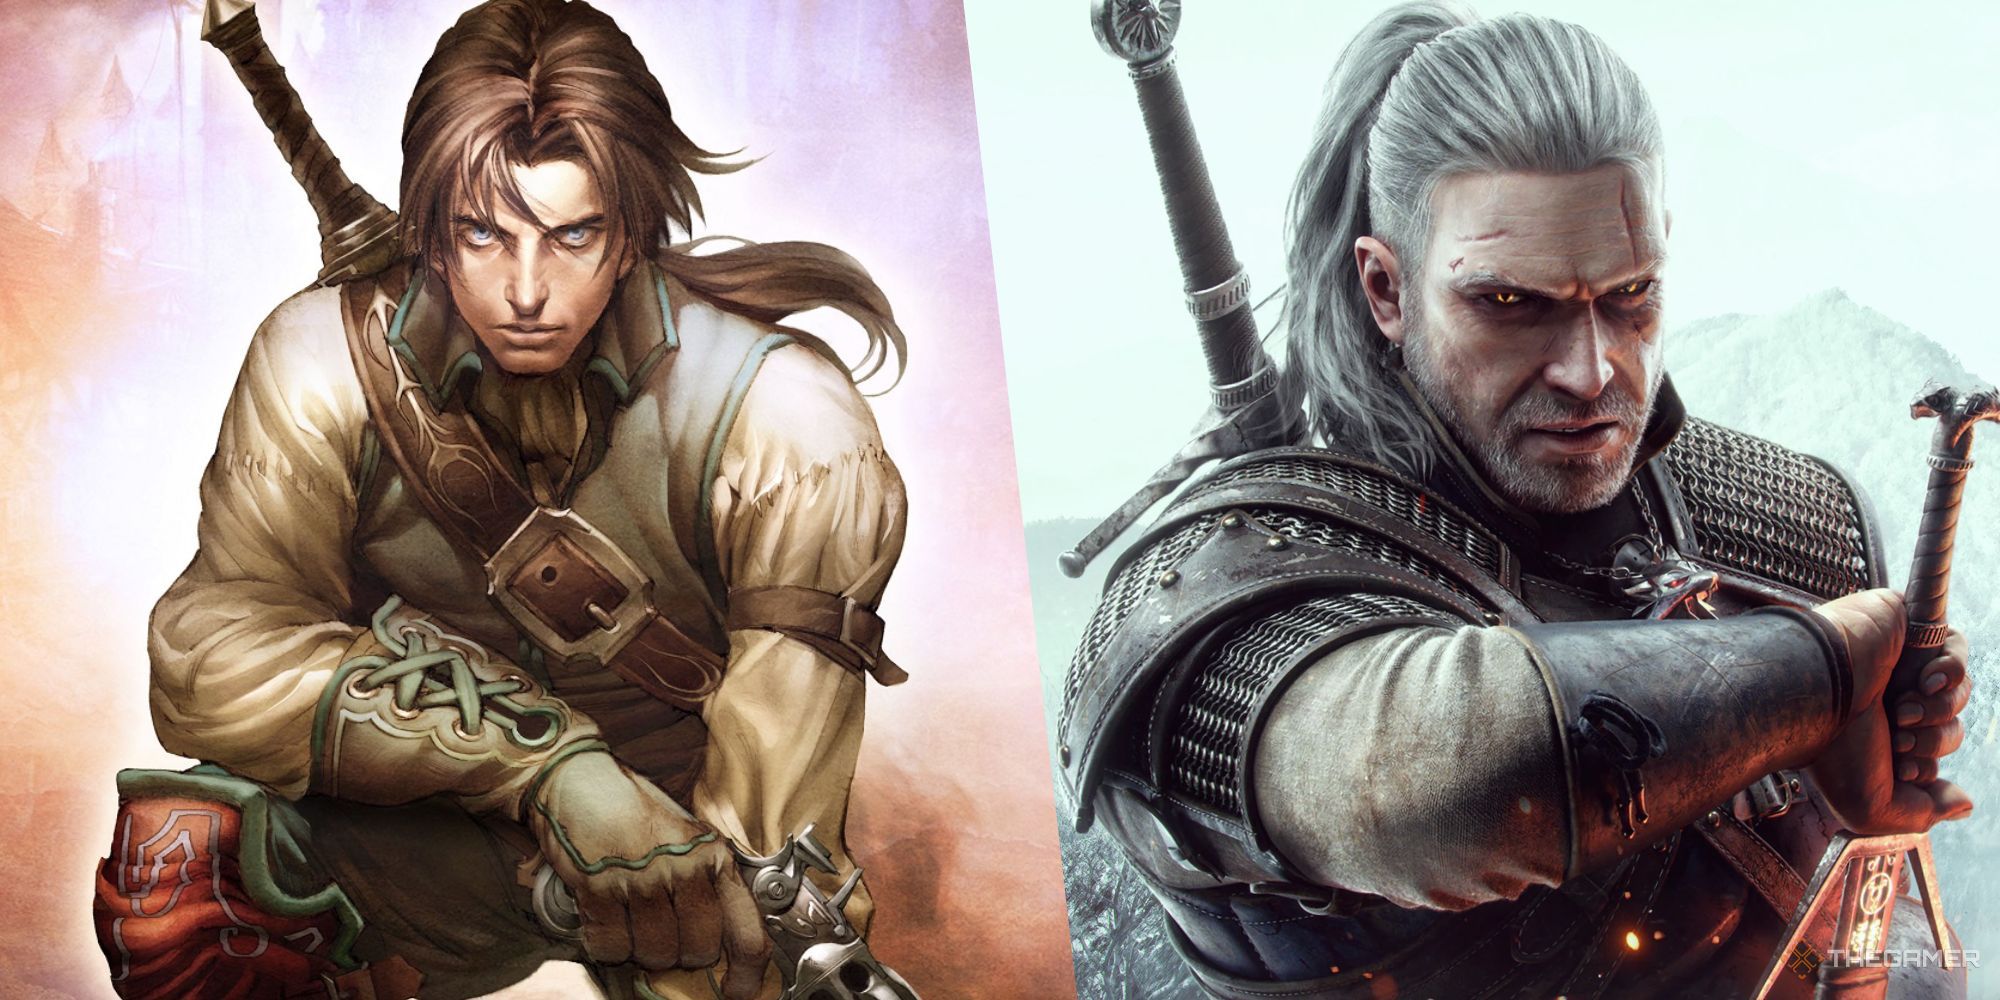 Left: box art for Fable 2, showing a male player character. RIght: box art for The Witcher 3, showing Geralt wielding a sword. 